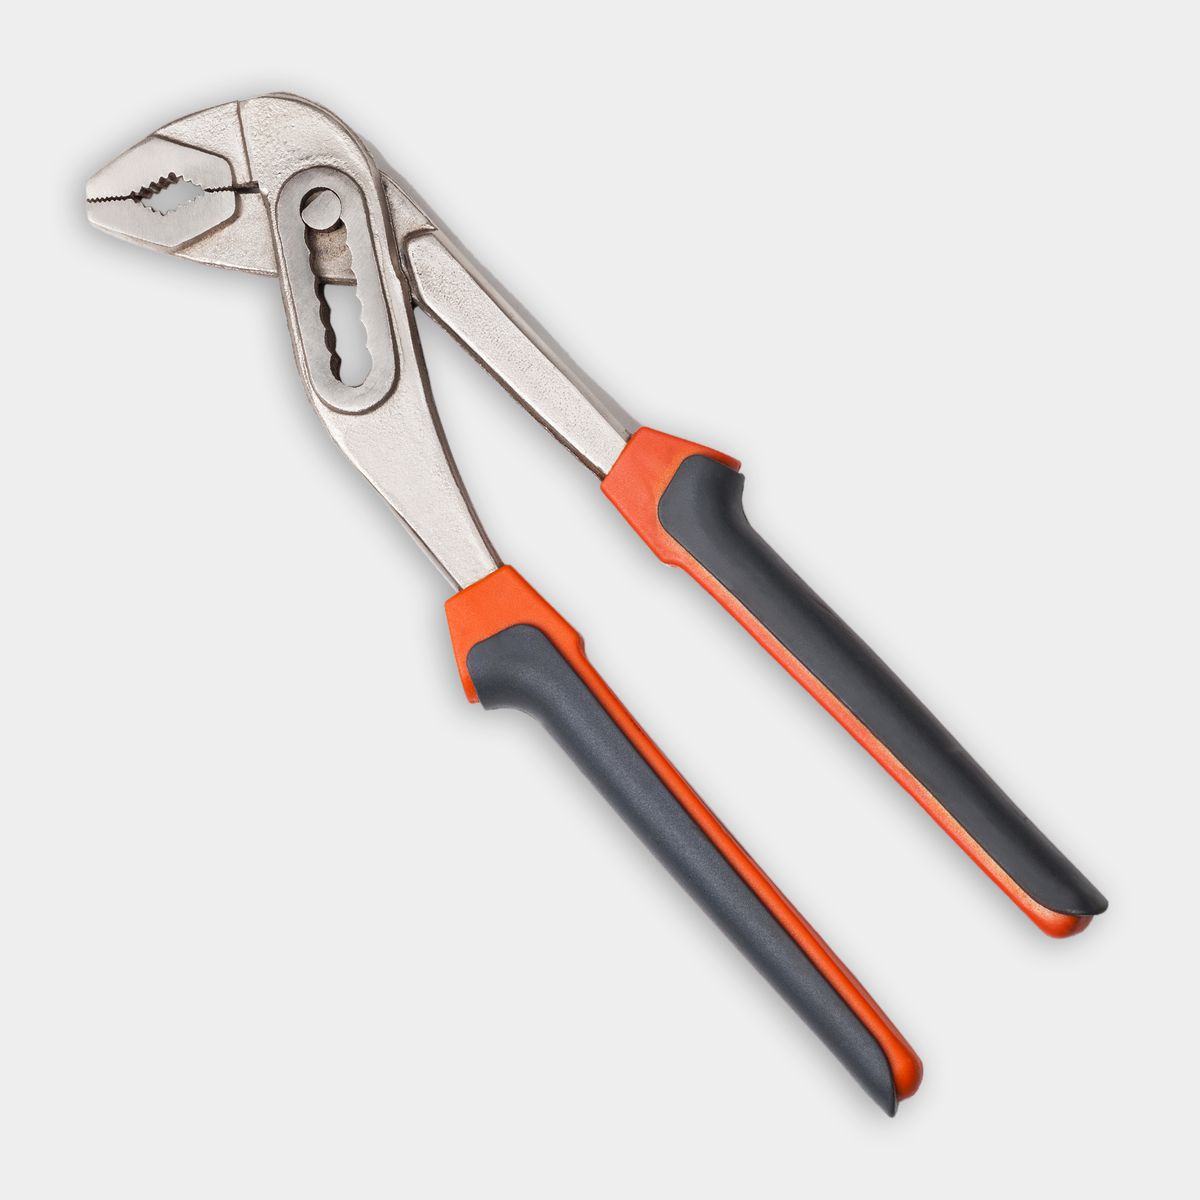 tongue-and-groove pliers on grey background